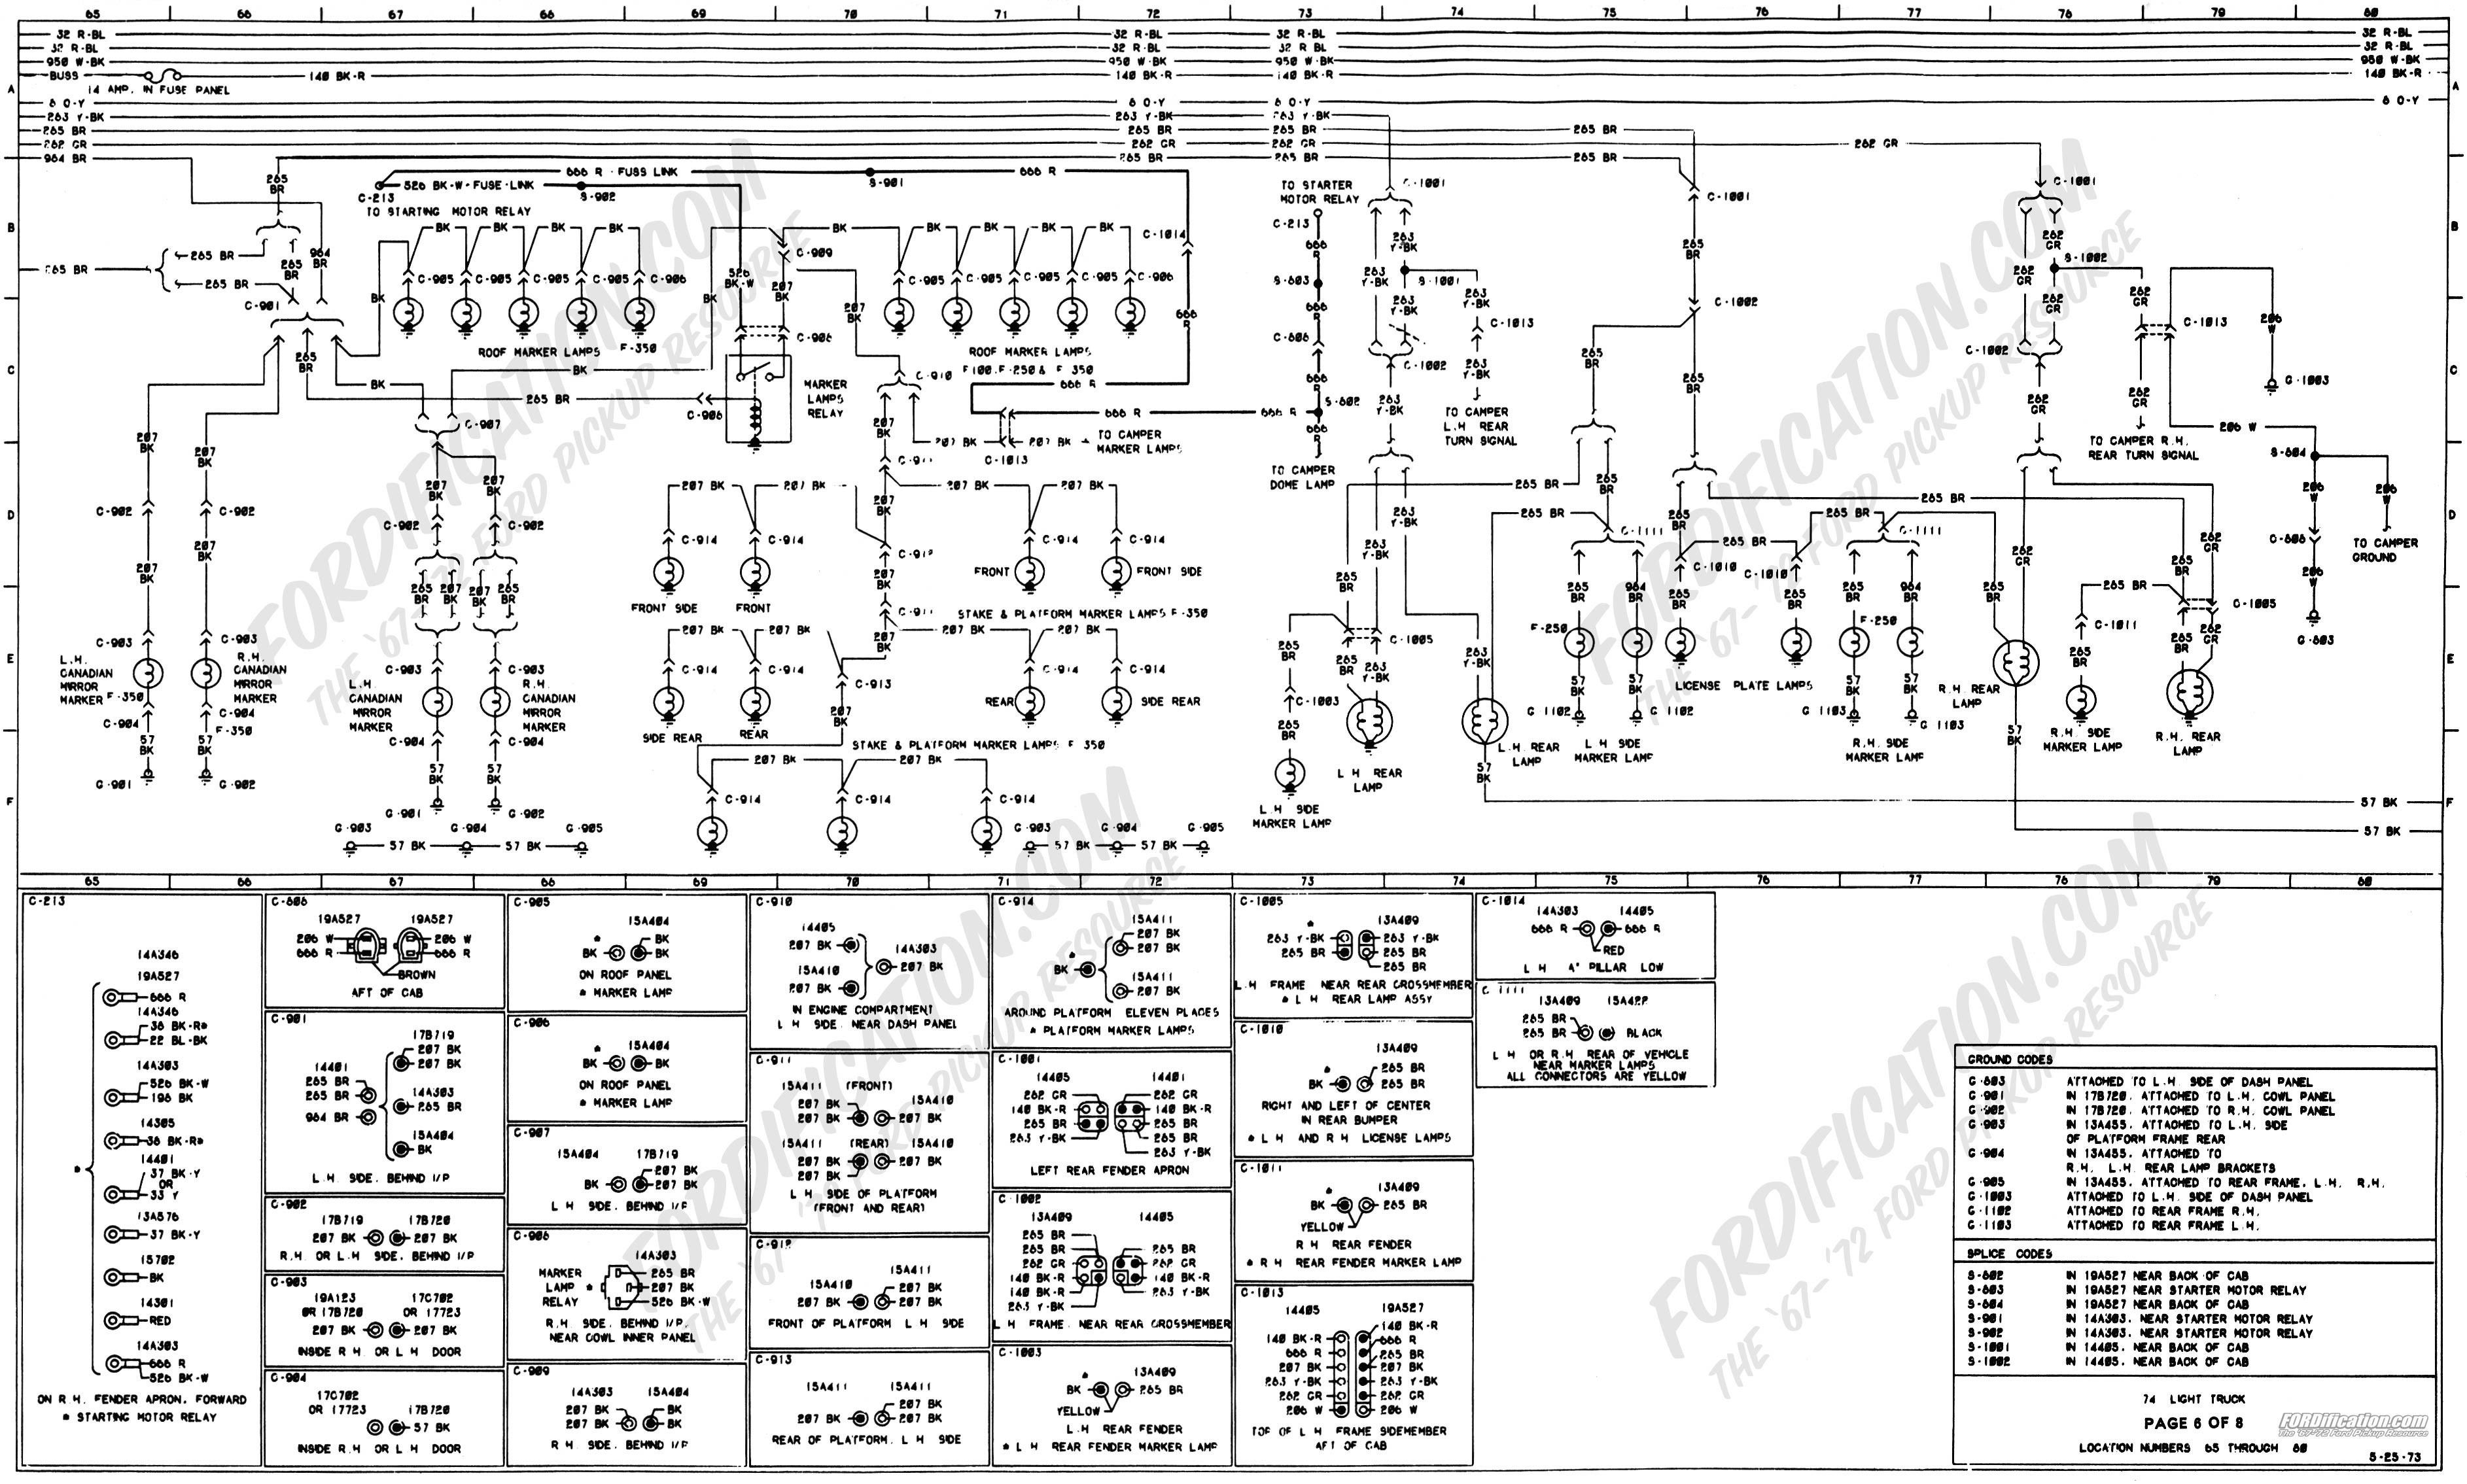 Audi Wiring Diagram line Save Wiring Diagrams Ford Trucks And F250 Diagram Line